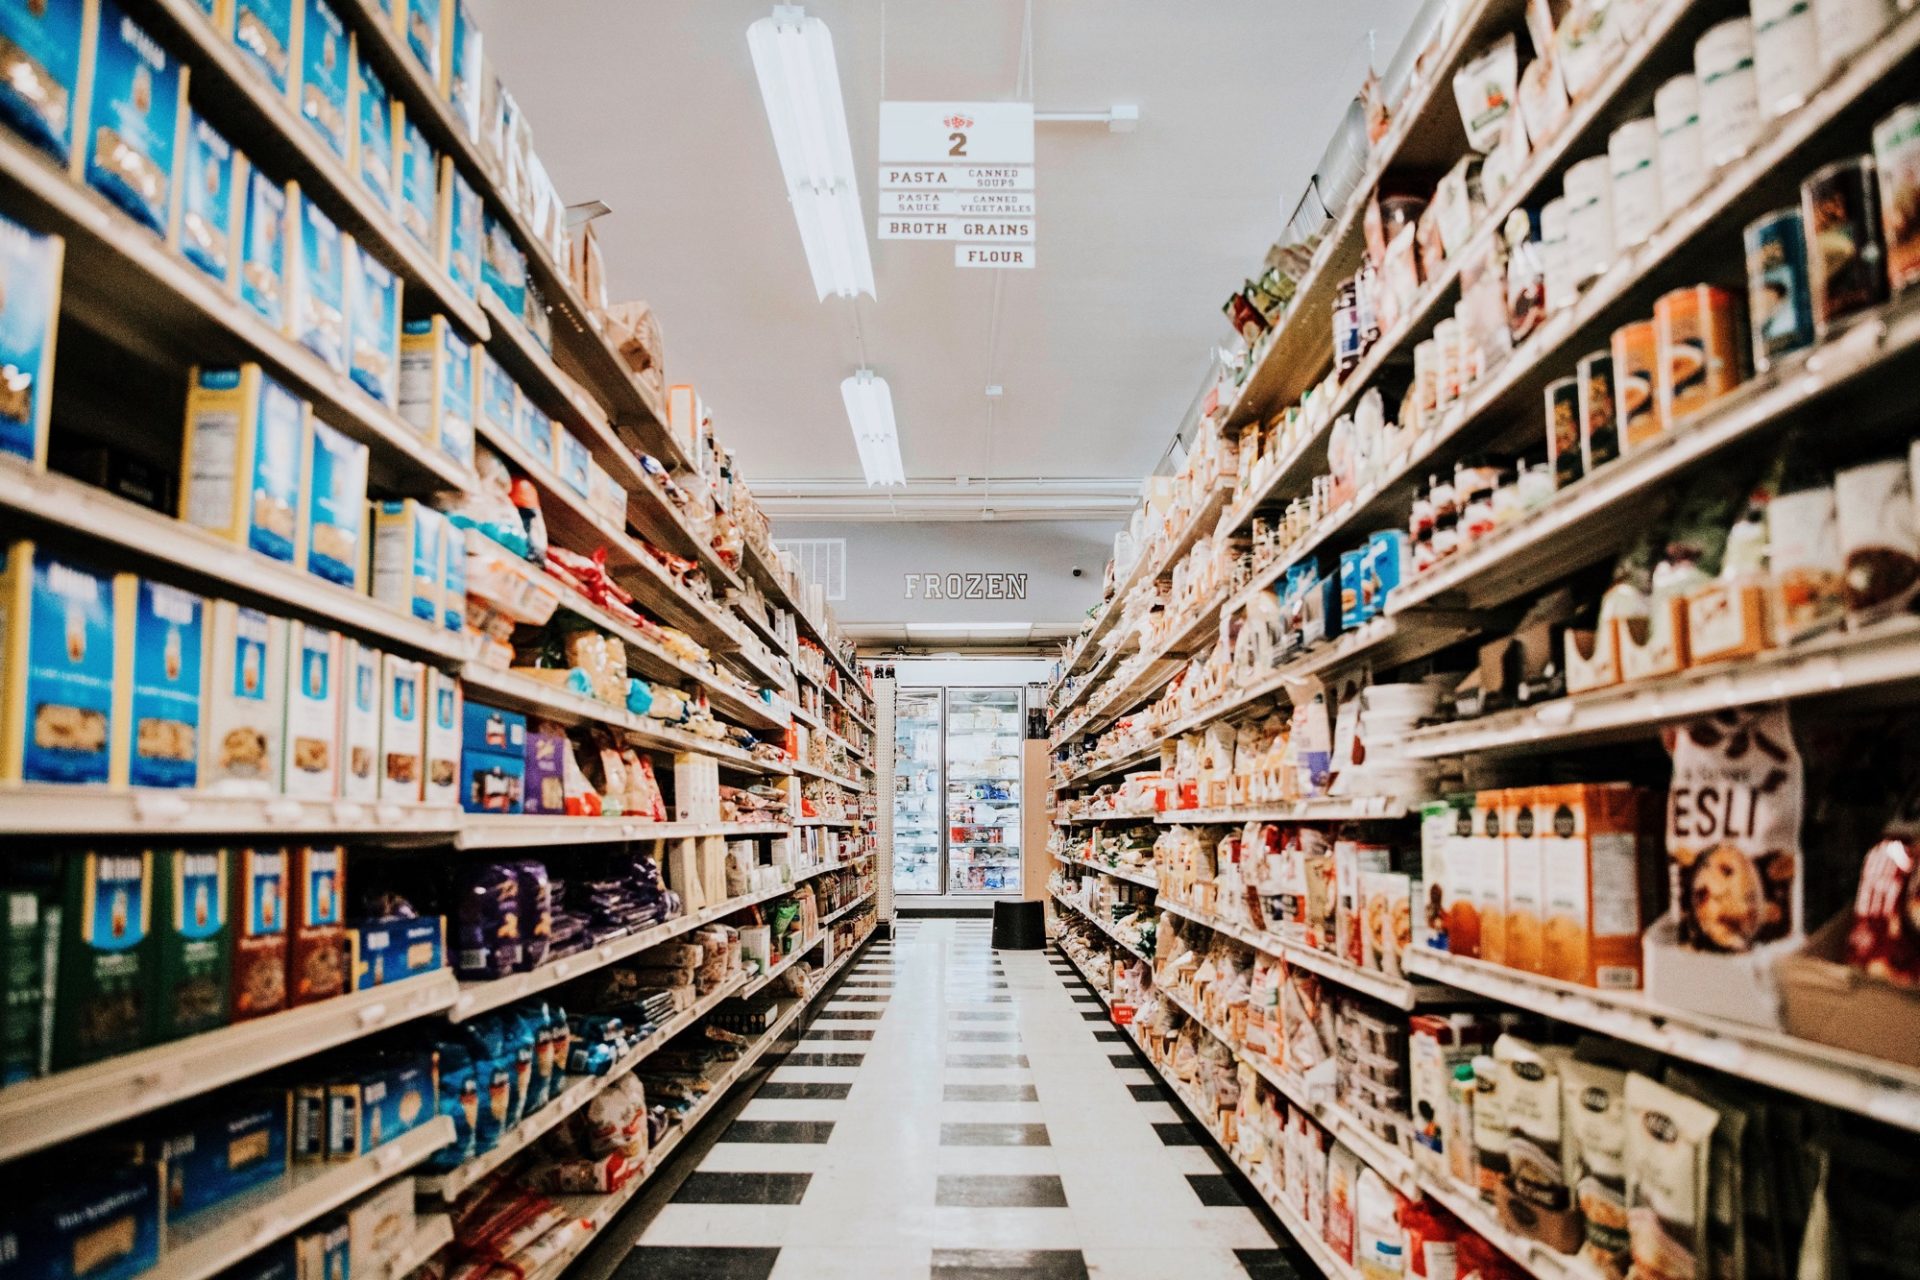 Aisle in a grocery store with products on shelves on both sides, a black and white checkered tile